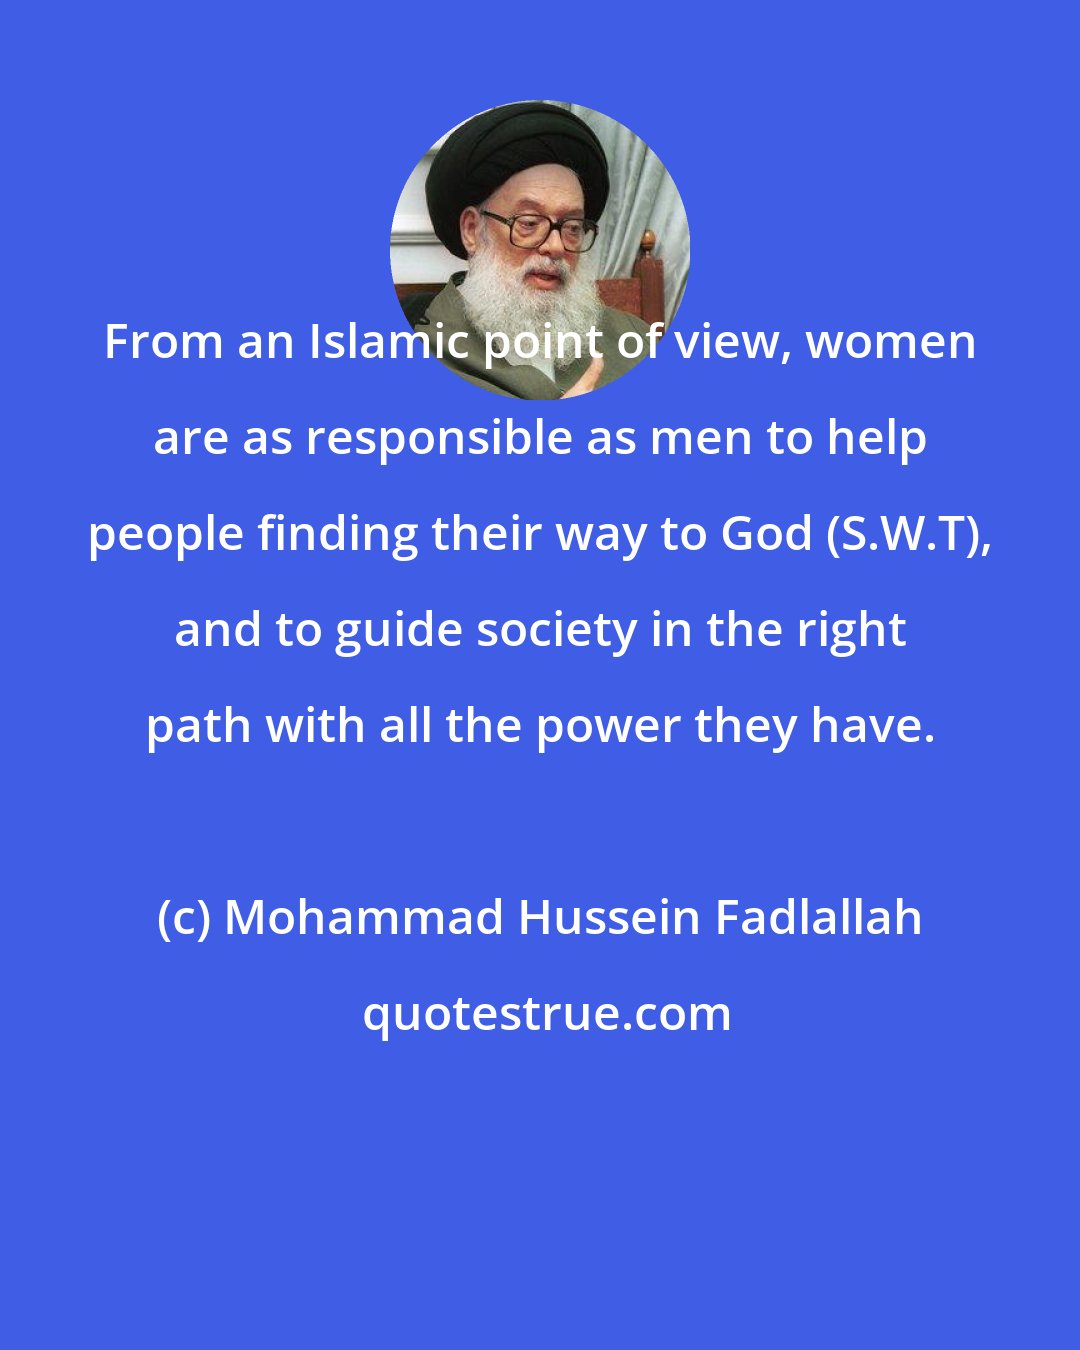 Mohammad Hussein Fadlallah: From an Islamic point of view, women are as responsible as men to help people finding their way to God (S.W.T), and to guide society in the right path with all the power they have.